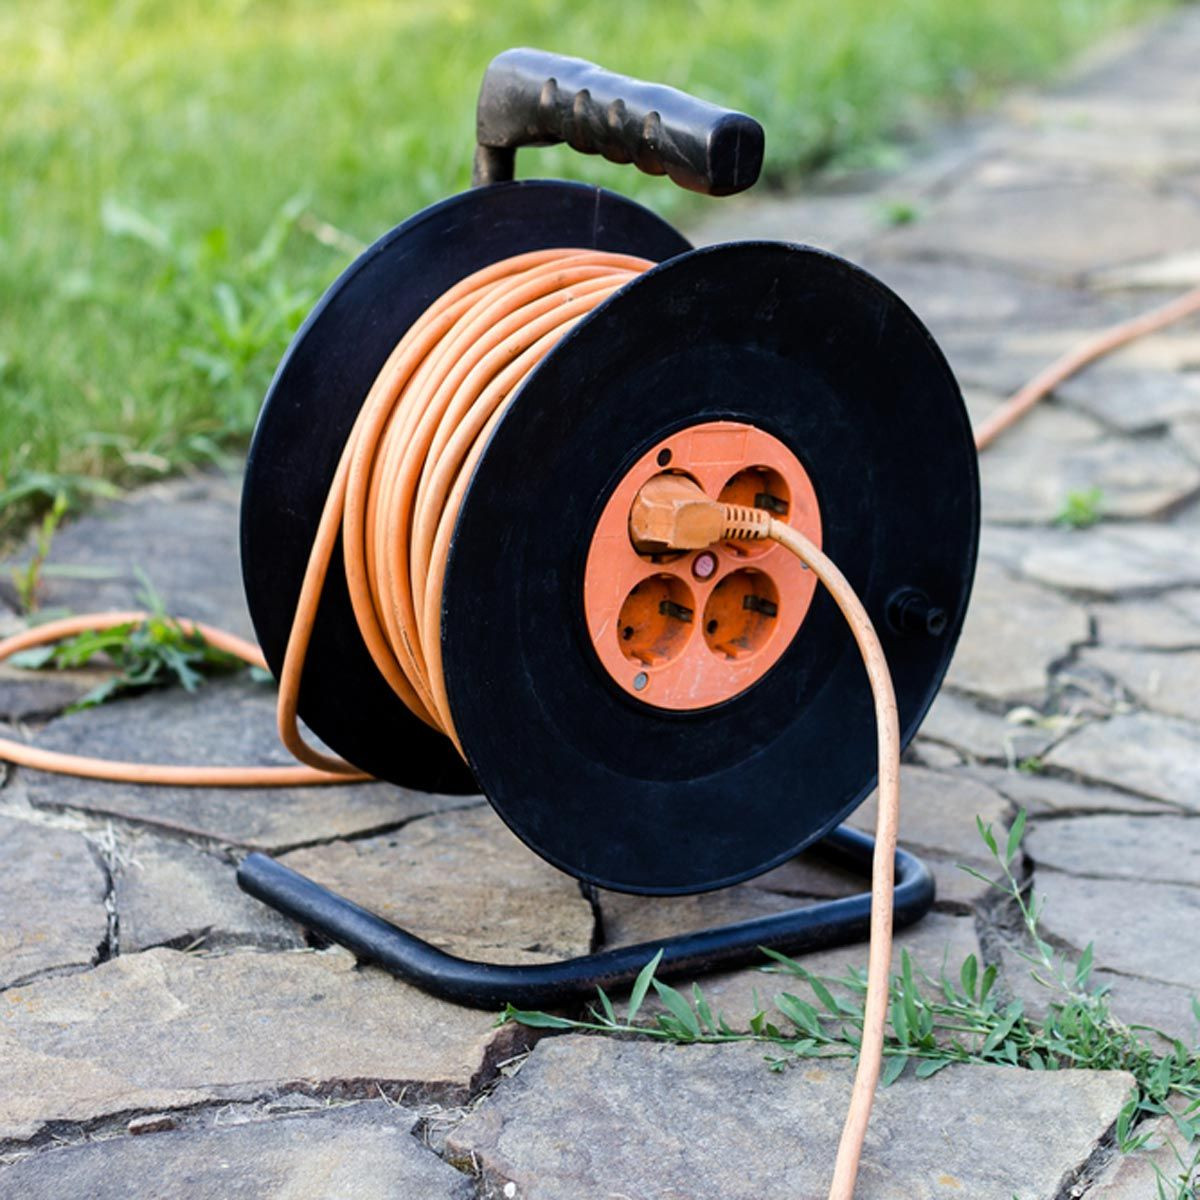 How To Protect Outdoor Extension Cord From Rain DIY
 This Nifty Trick Will Fix an Extension Cord for ly $4